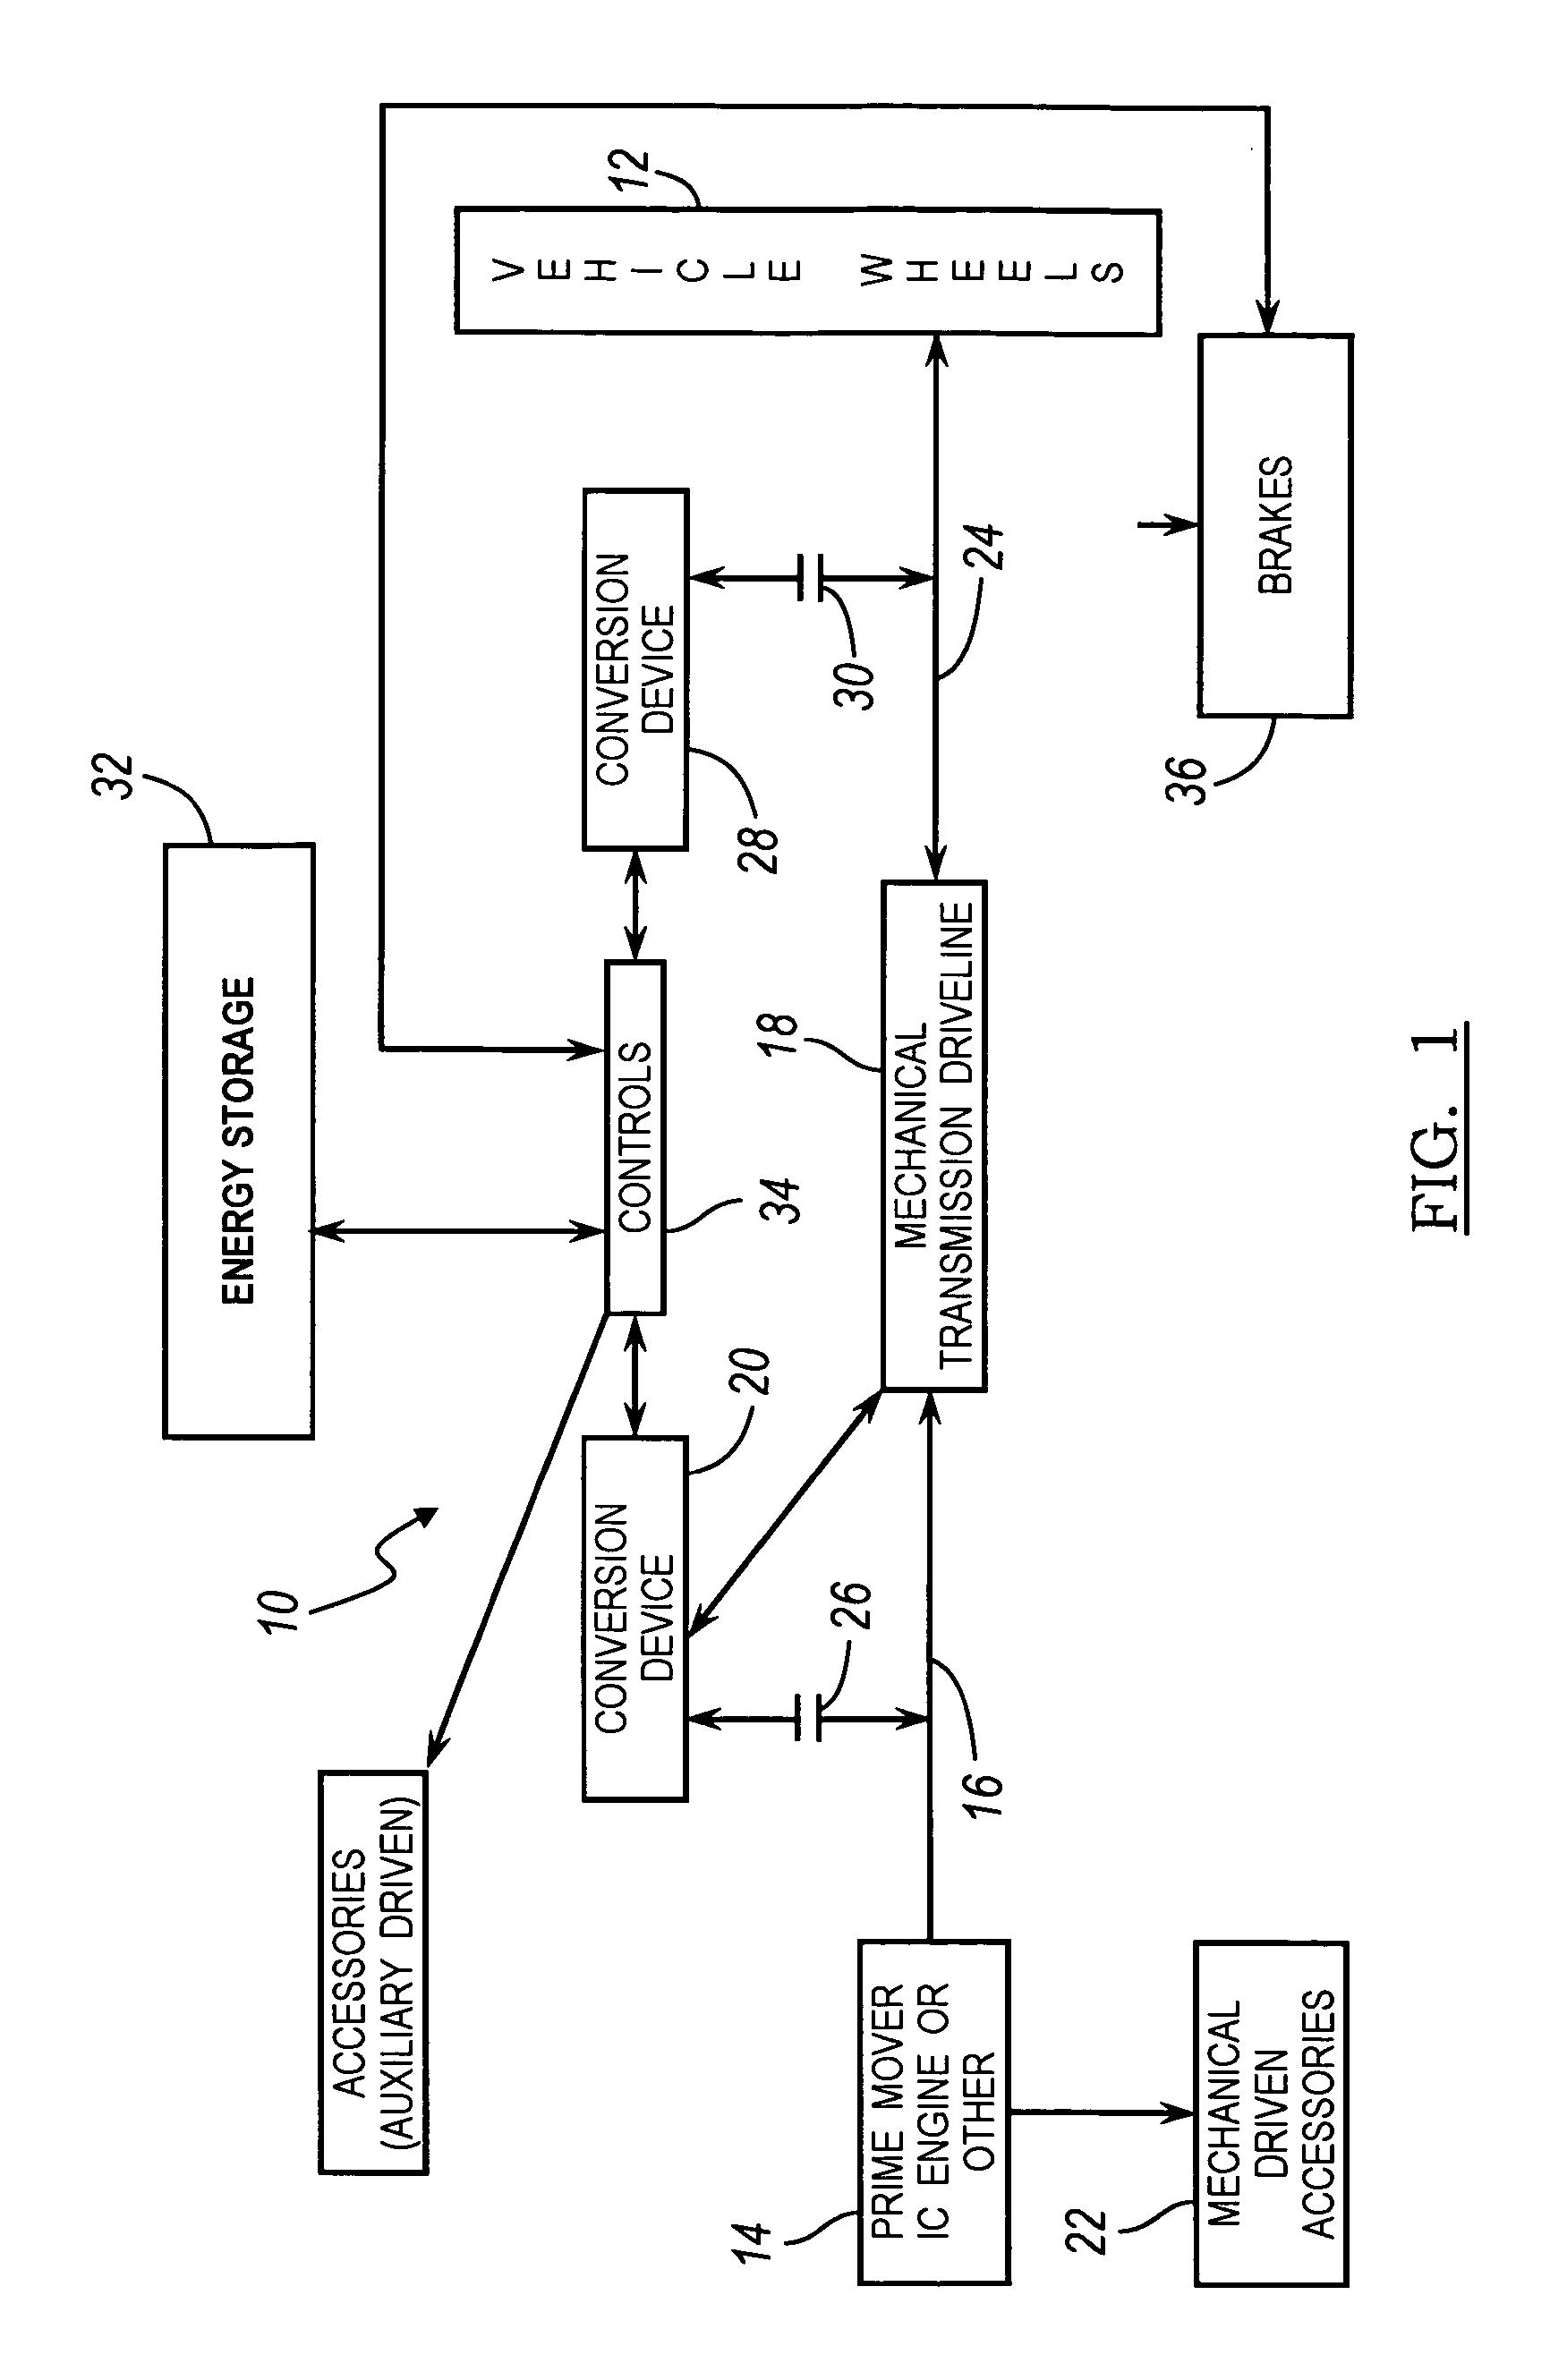 Vehicle powertrain that compensates for a prime mover having slow transient response